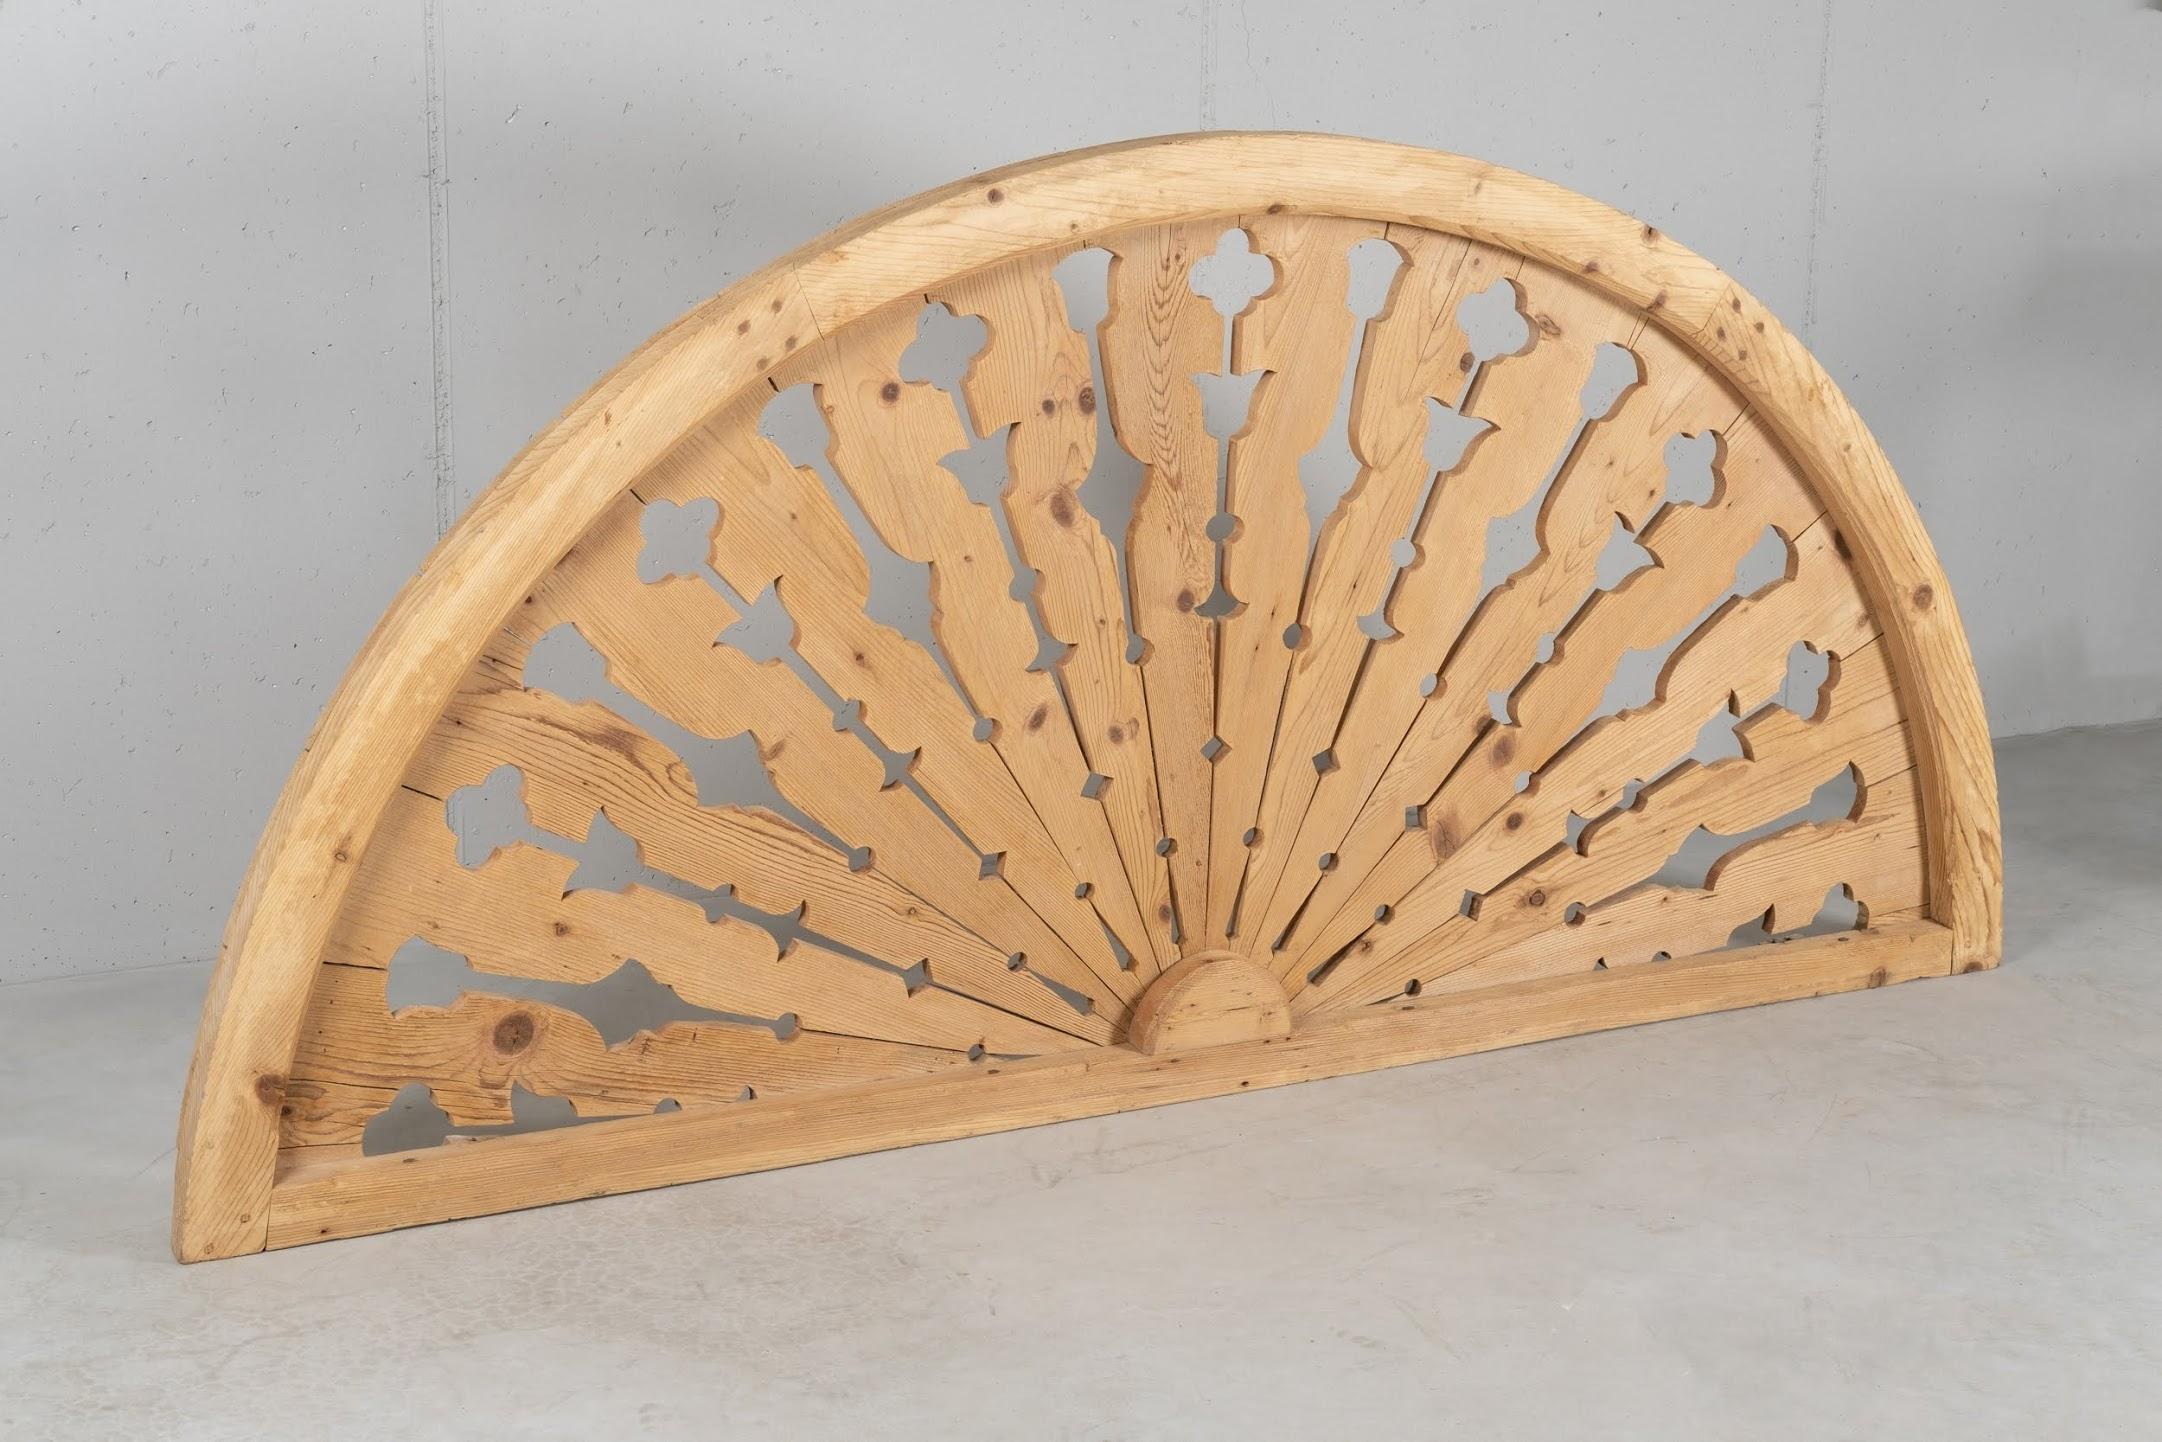 Restored and cleaned, complete in all its parts. Often used also as a bed headboard.